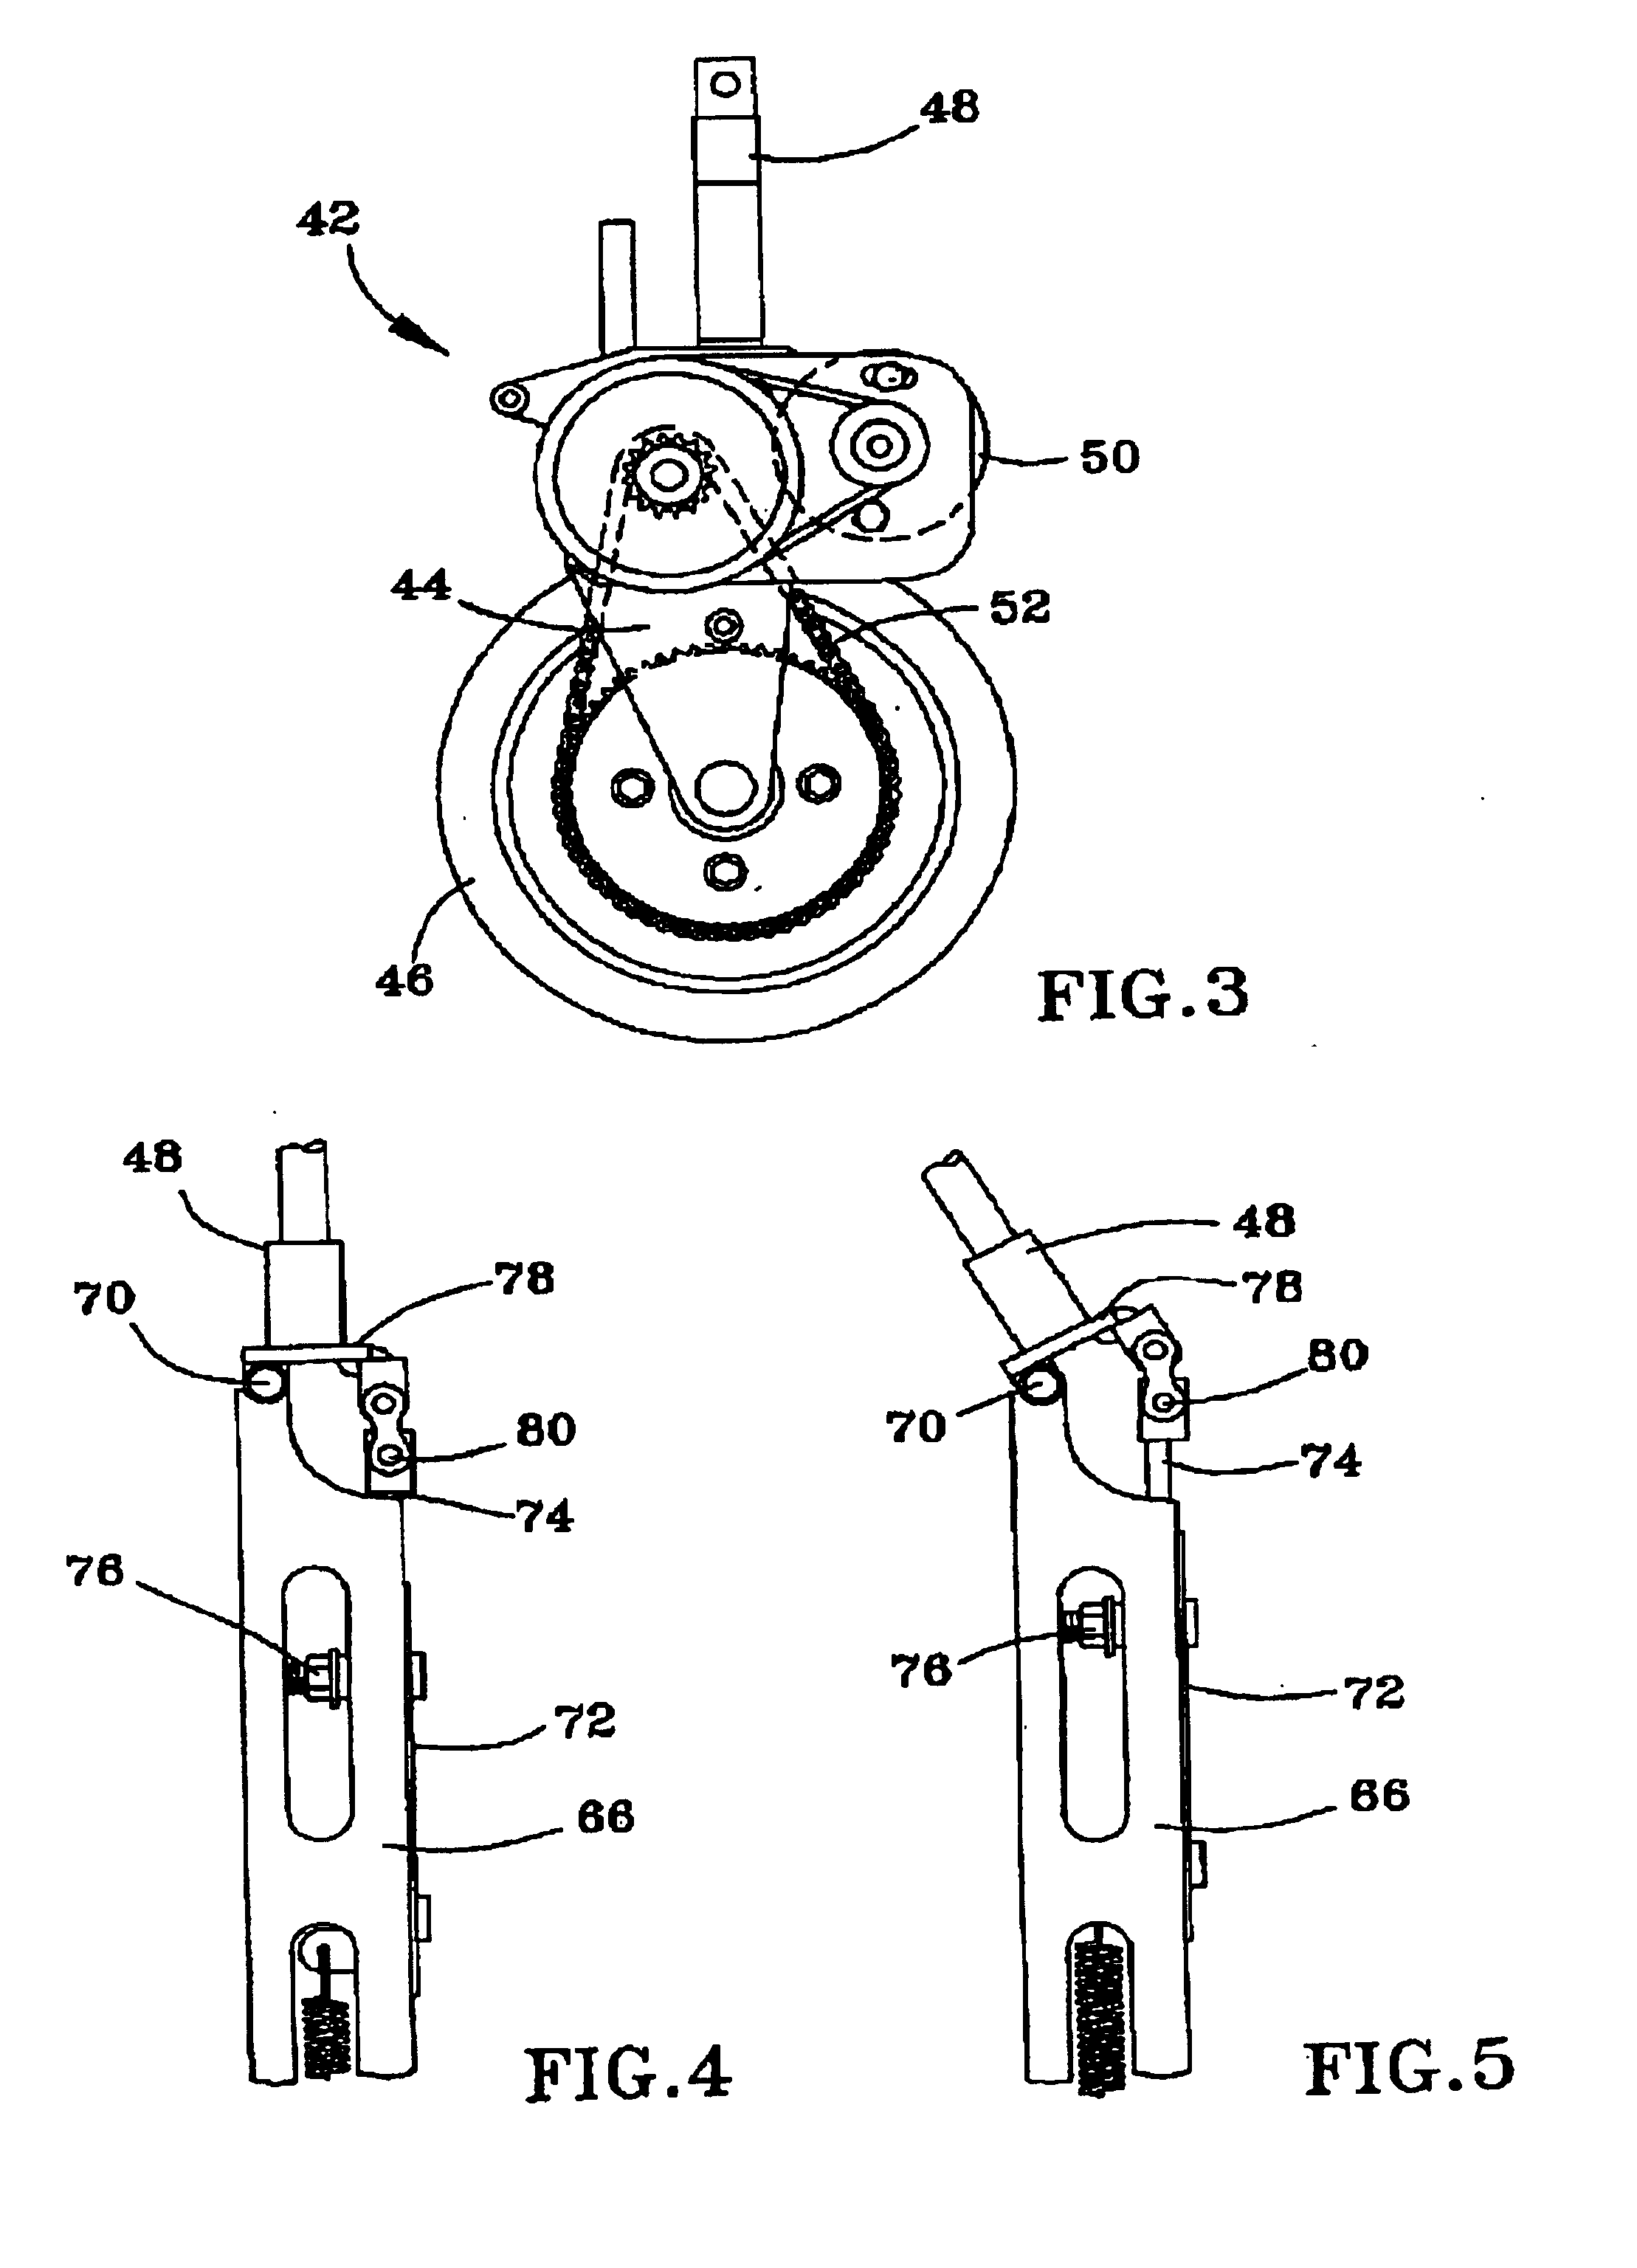 Freestanding self-propelled device for moving objects